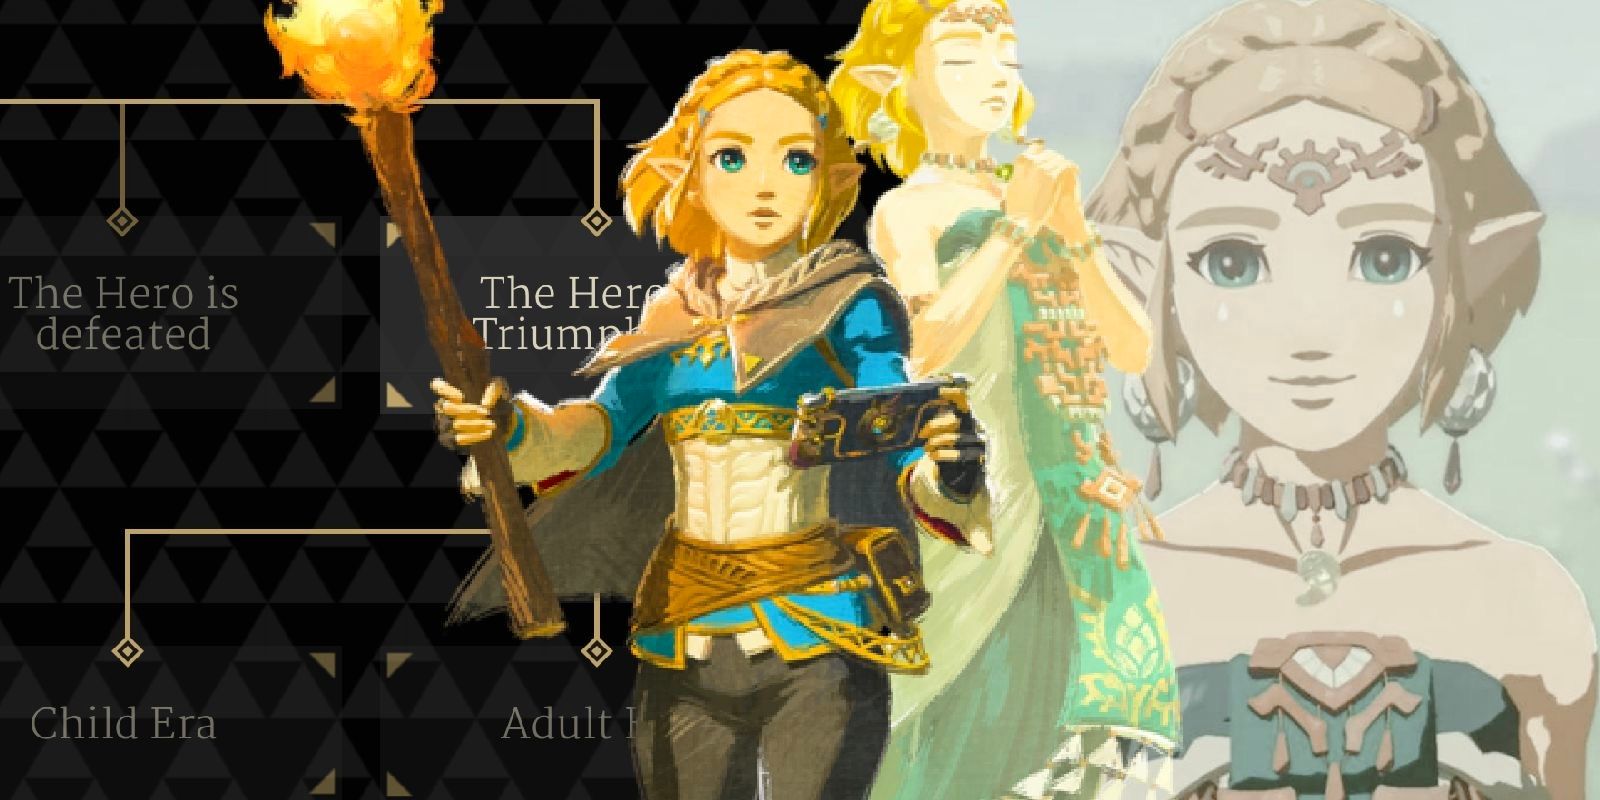 Tears Of The Kingdom: Where Does The Game Fit Into The Zelda Timeline?